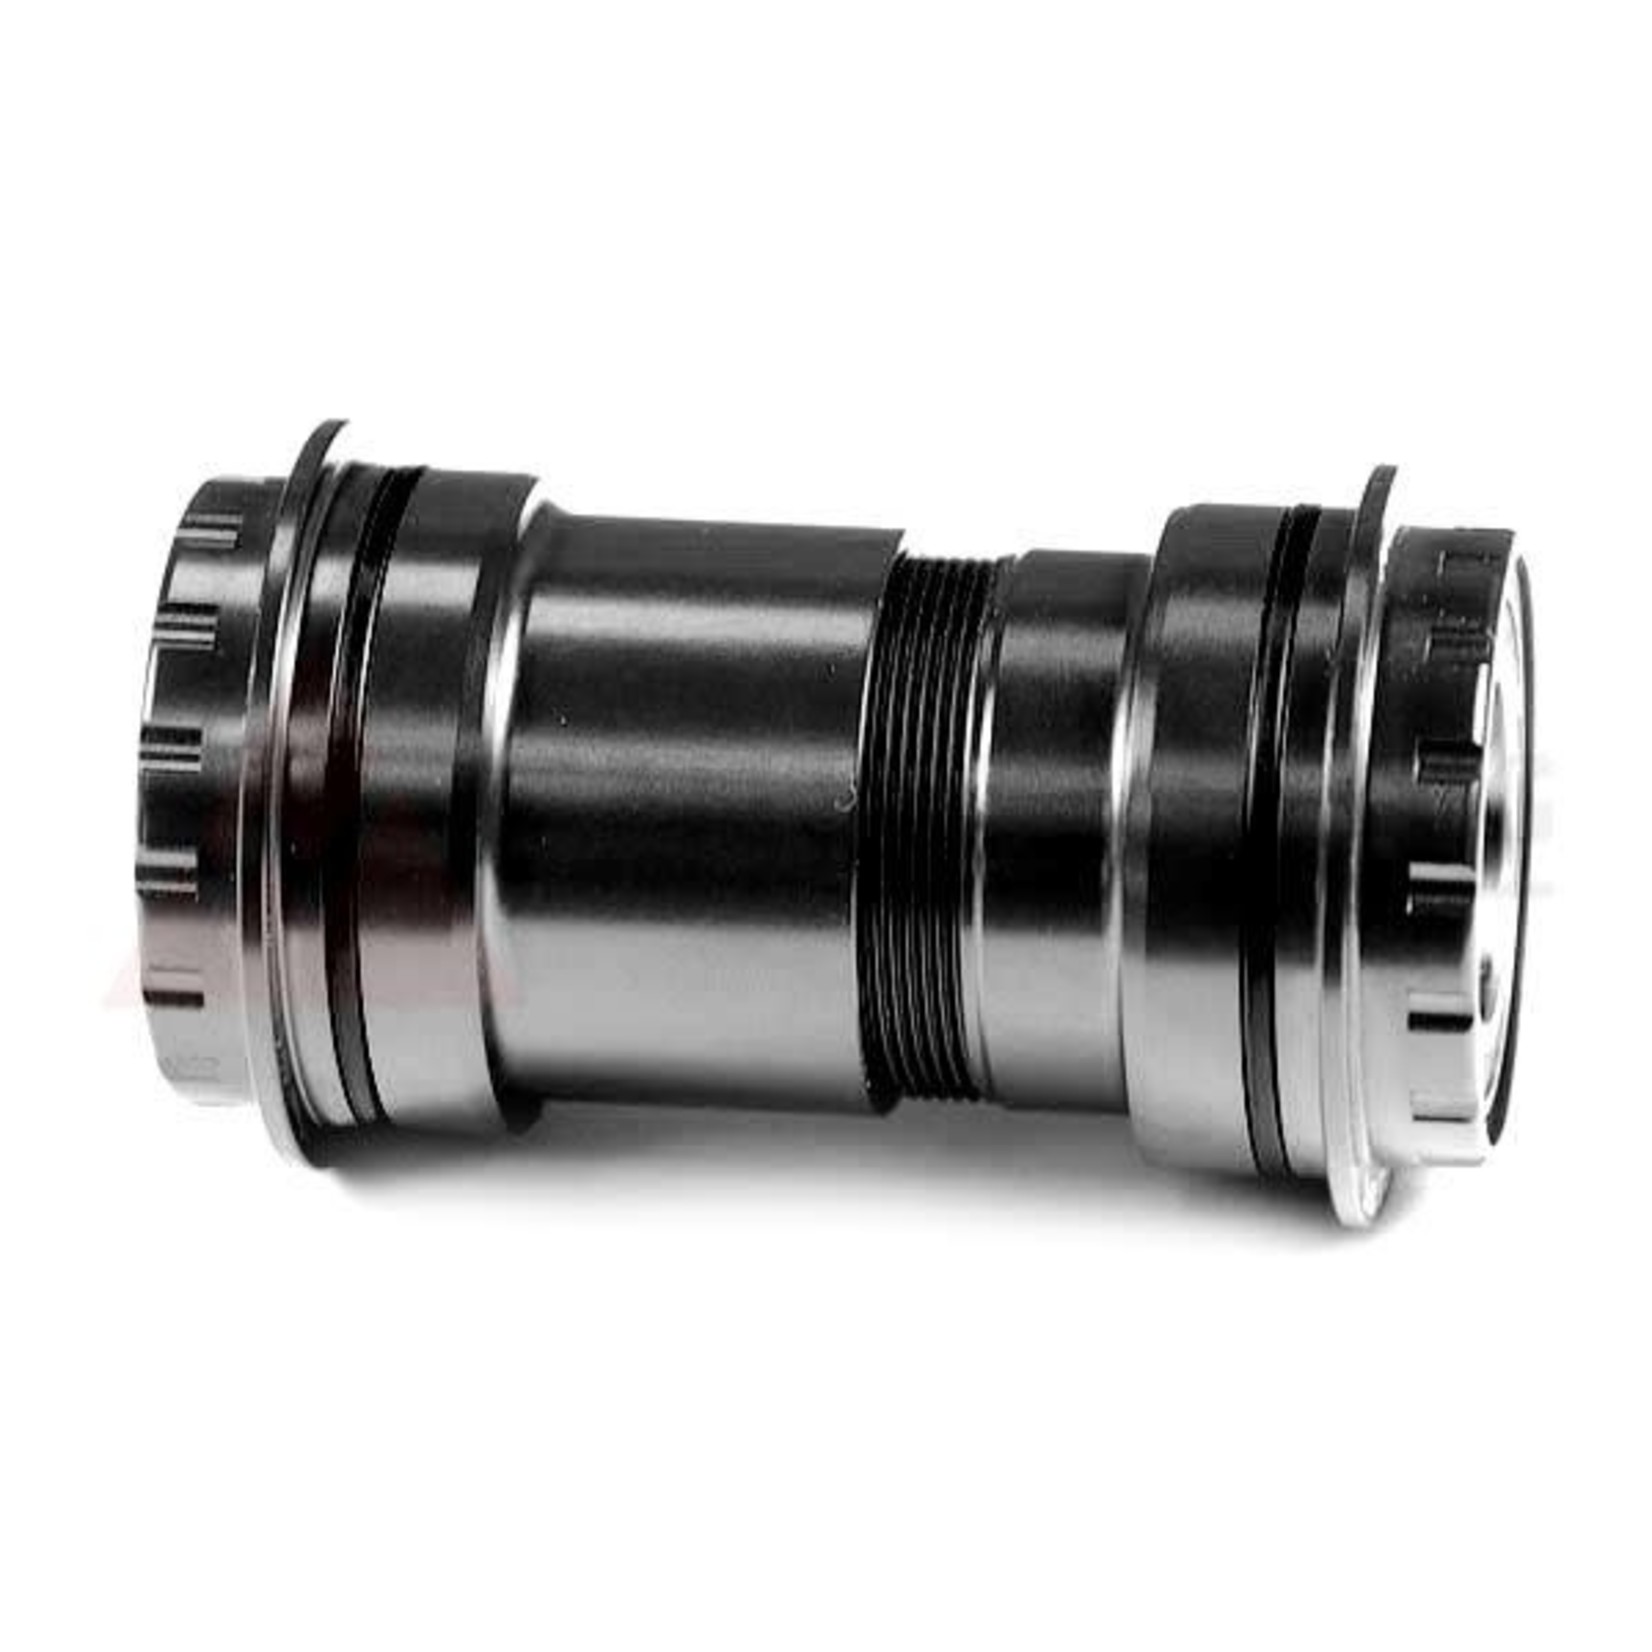 Wheels Manufacturing Wheels Mfg Bottom Bracket - BB30 Outboard Angular Contact BB for 24mm Cranks (Shimano)